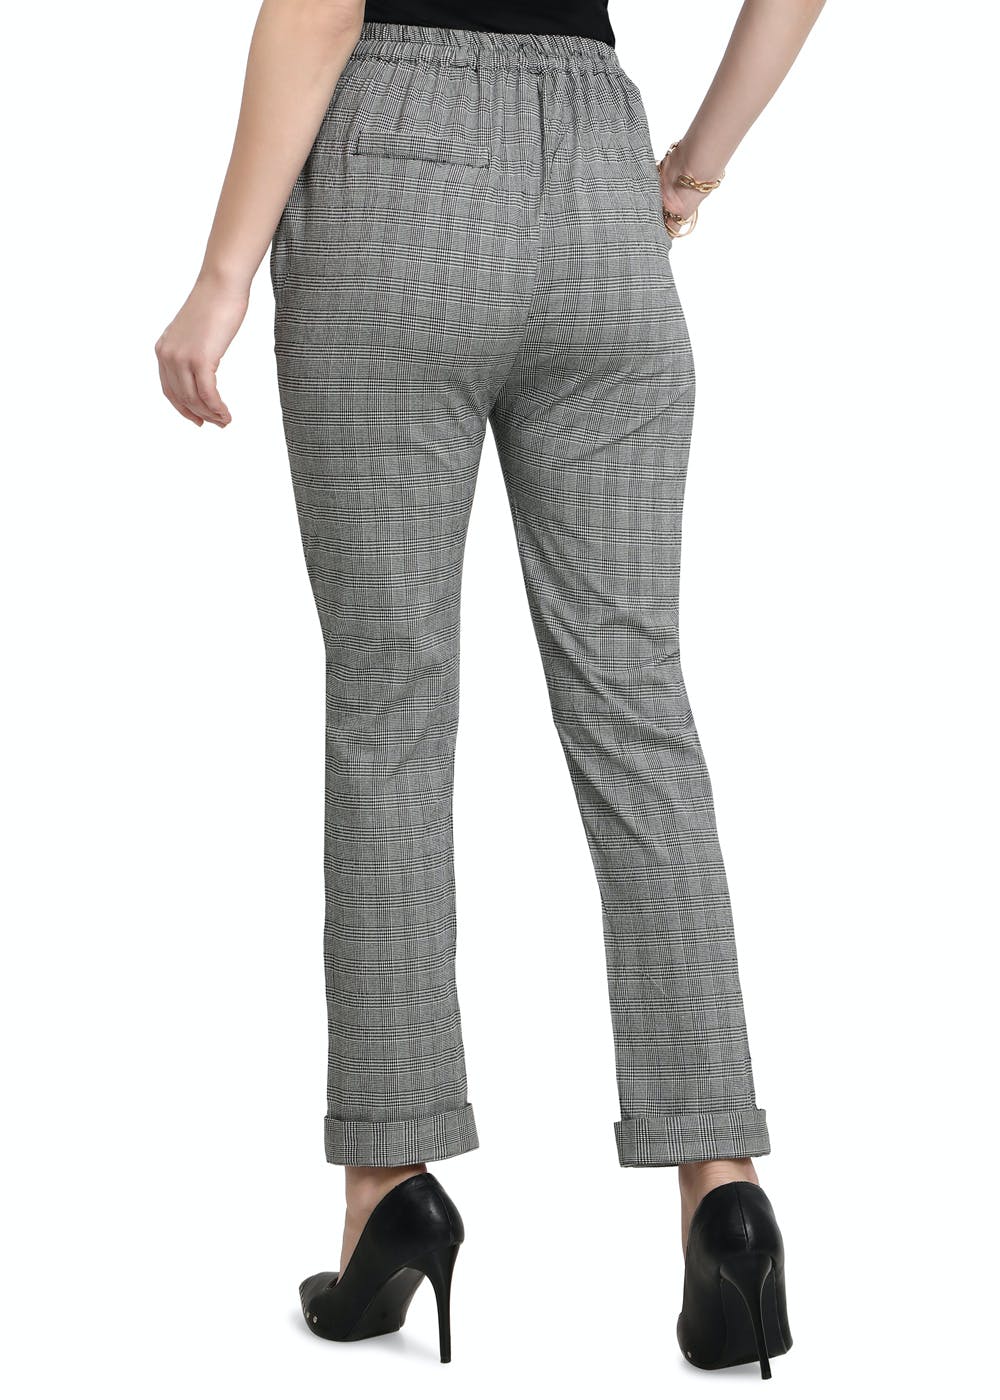 Mystere Paris Grey Striped Loung Pants Buy Mystere Paris Grey Striped  Loung Pants Online at Best Price in India  Nykaa